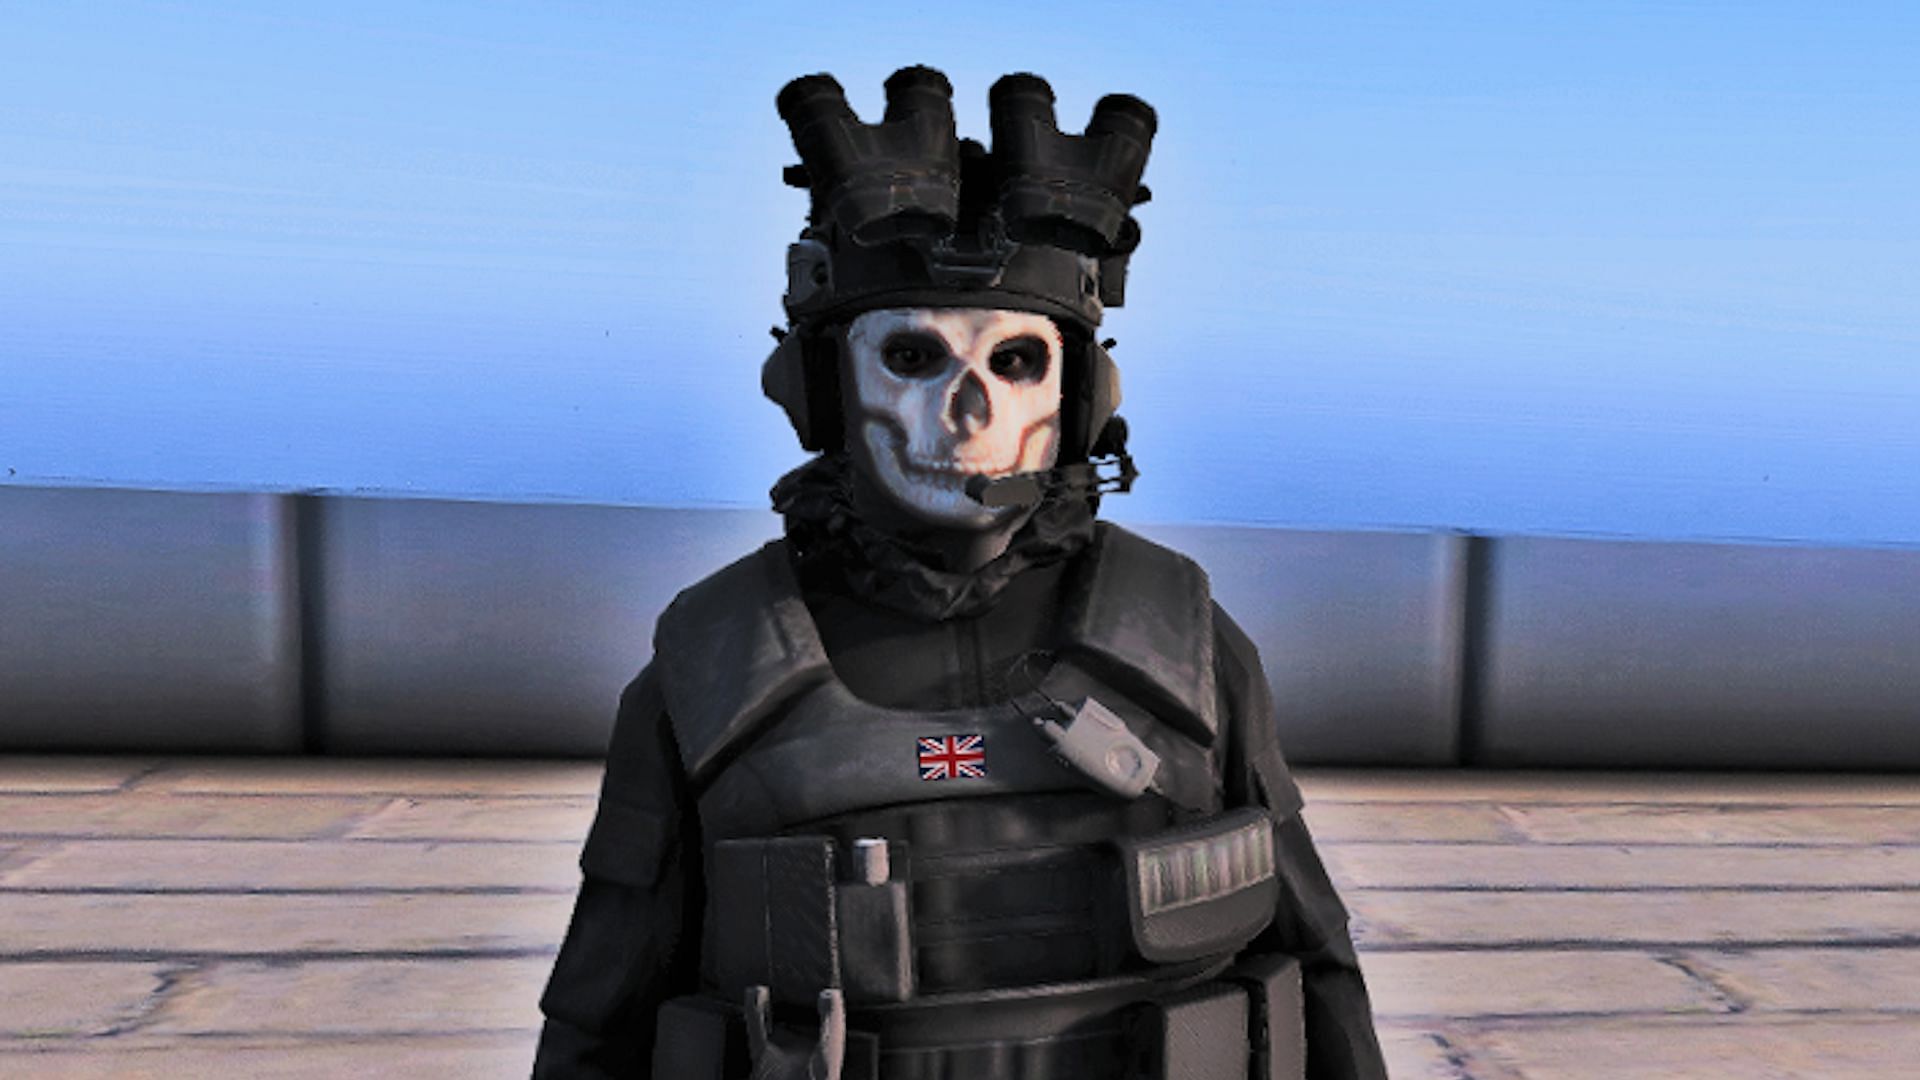 Ghost from Call of duty MW2 2022 for Skin Control 